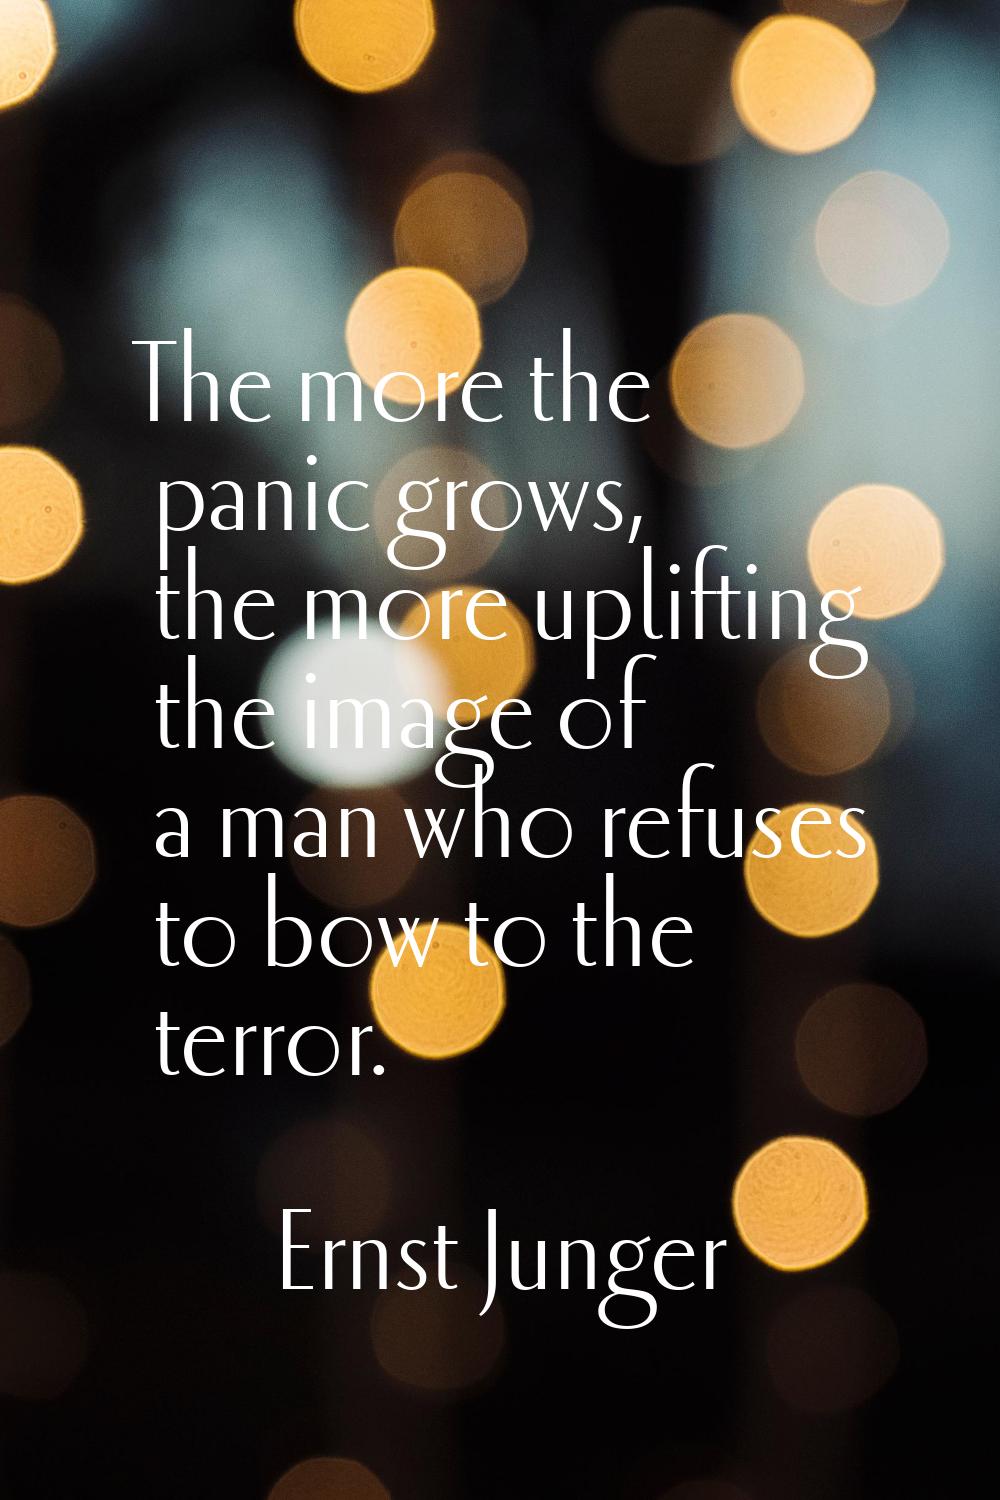 The more the panic grows, the more uplifting the image of a man who refuses to bow to the terror.